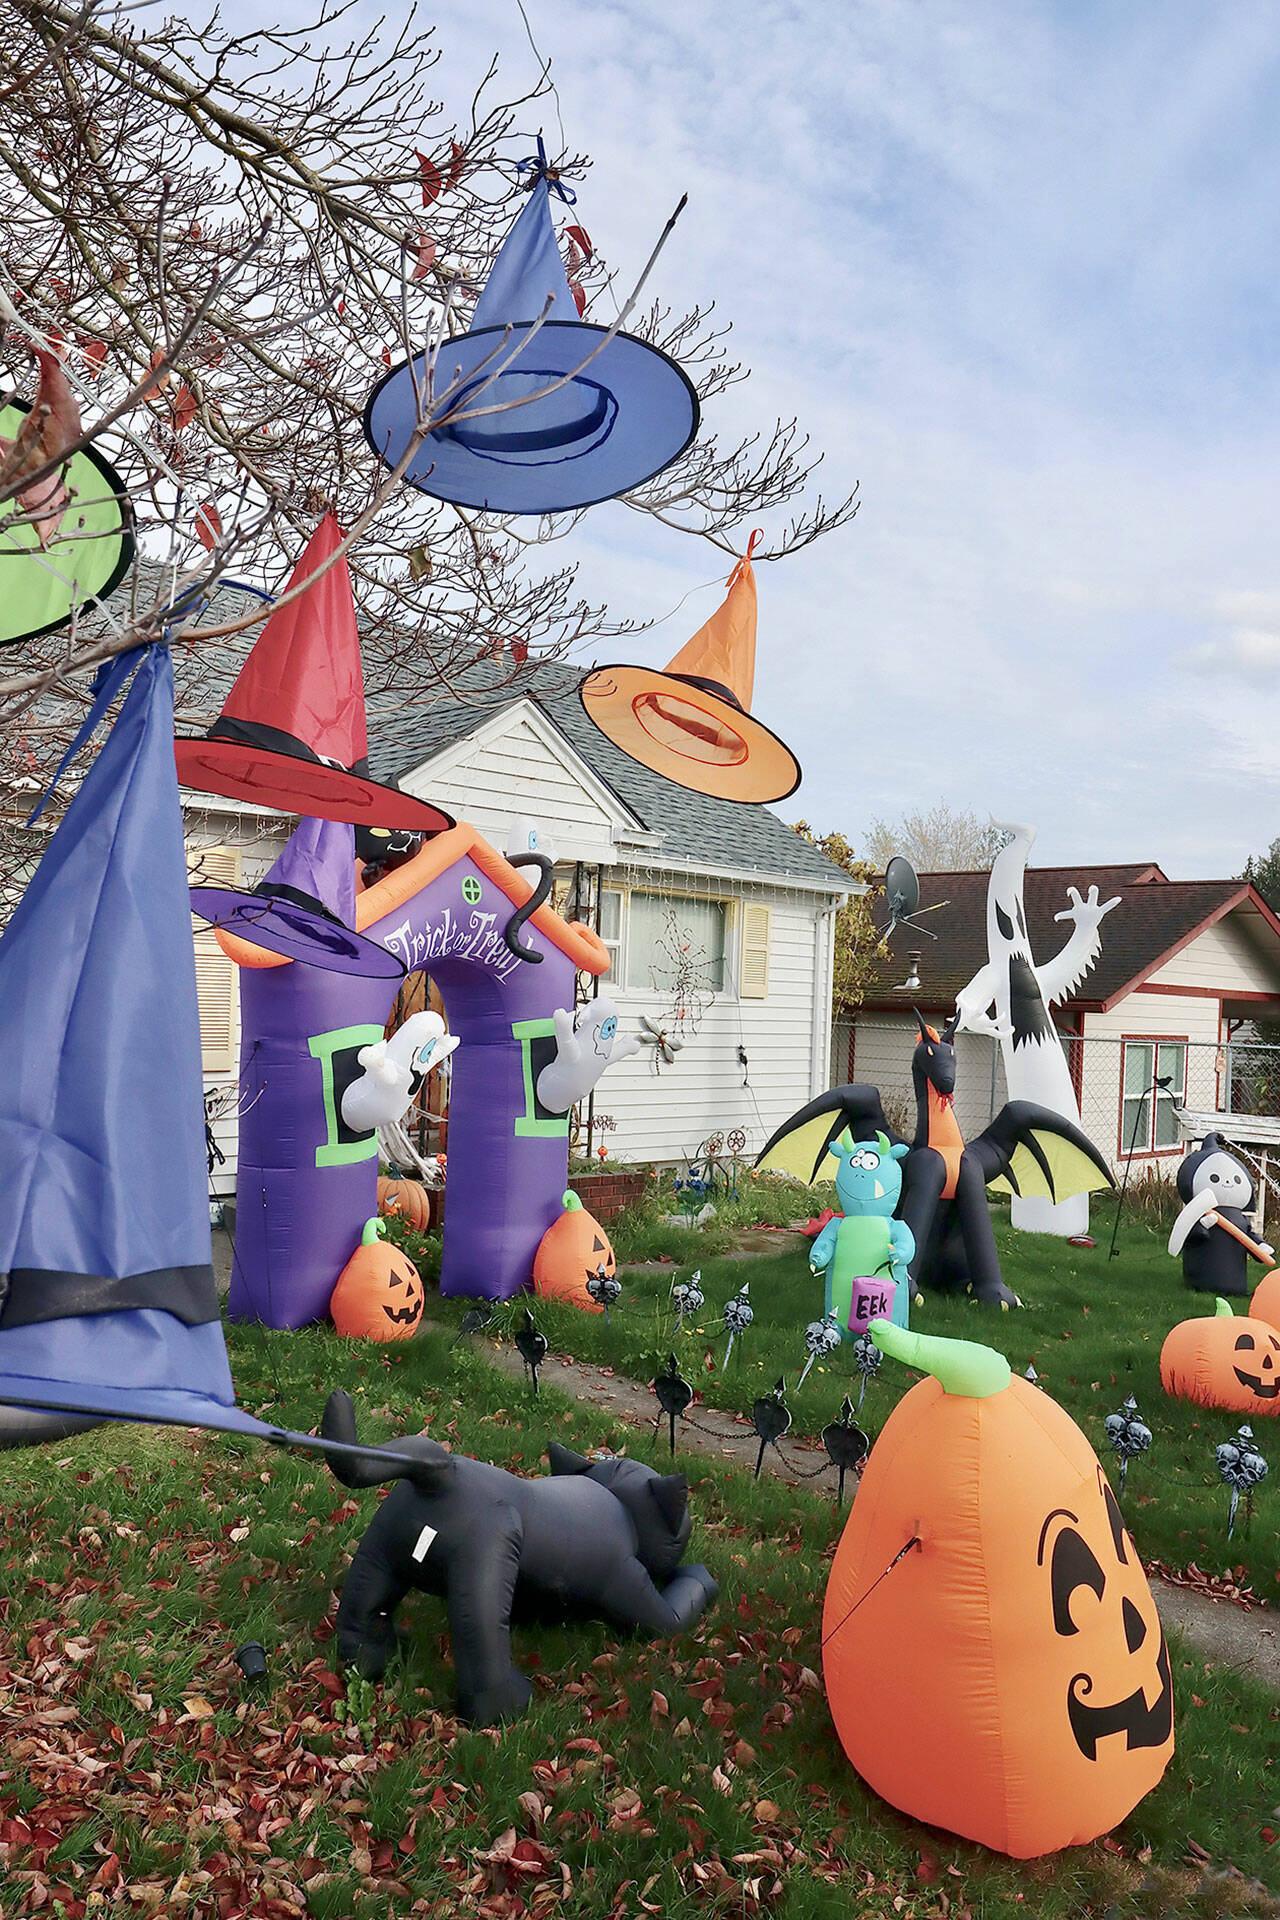 This Halloween display is at 812 West 9th in Port Angeles.